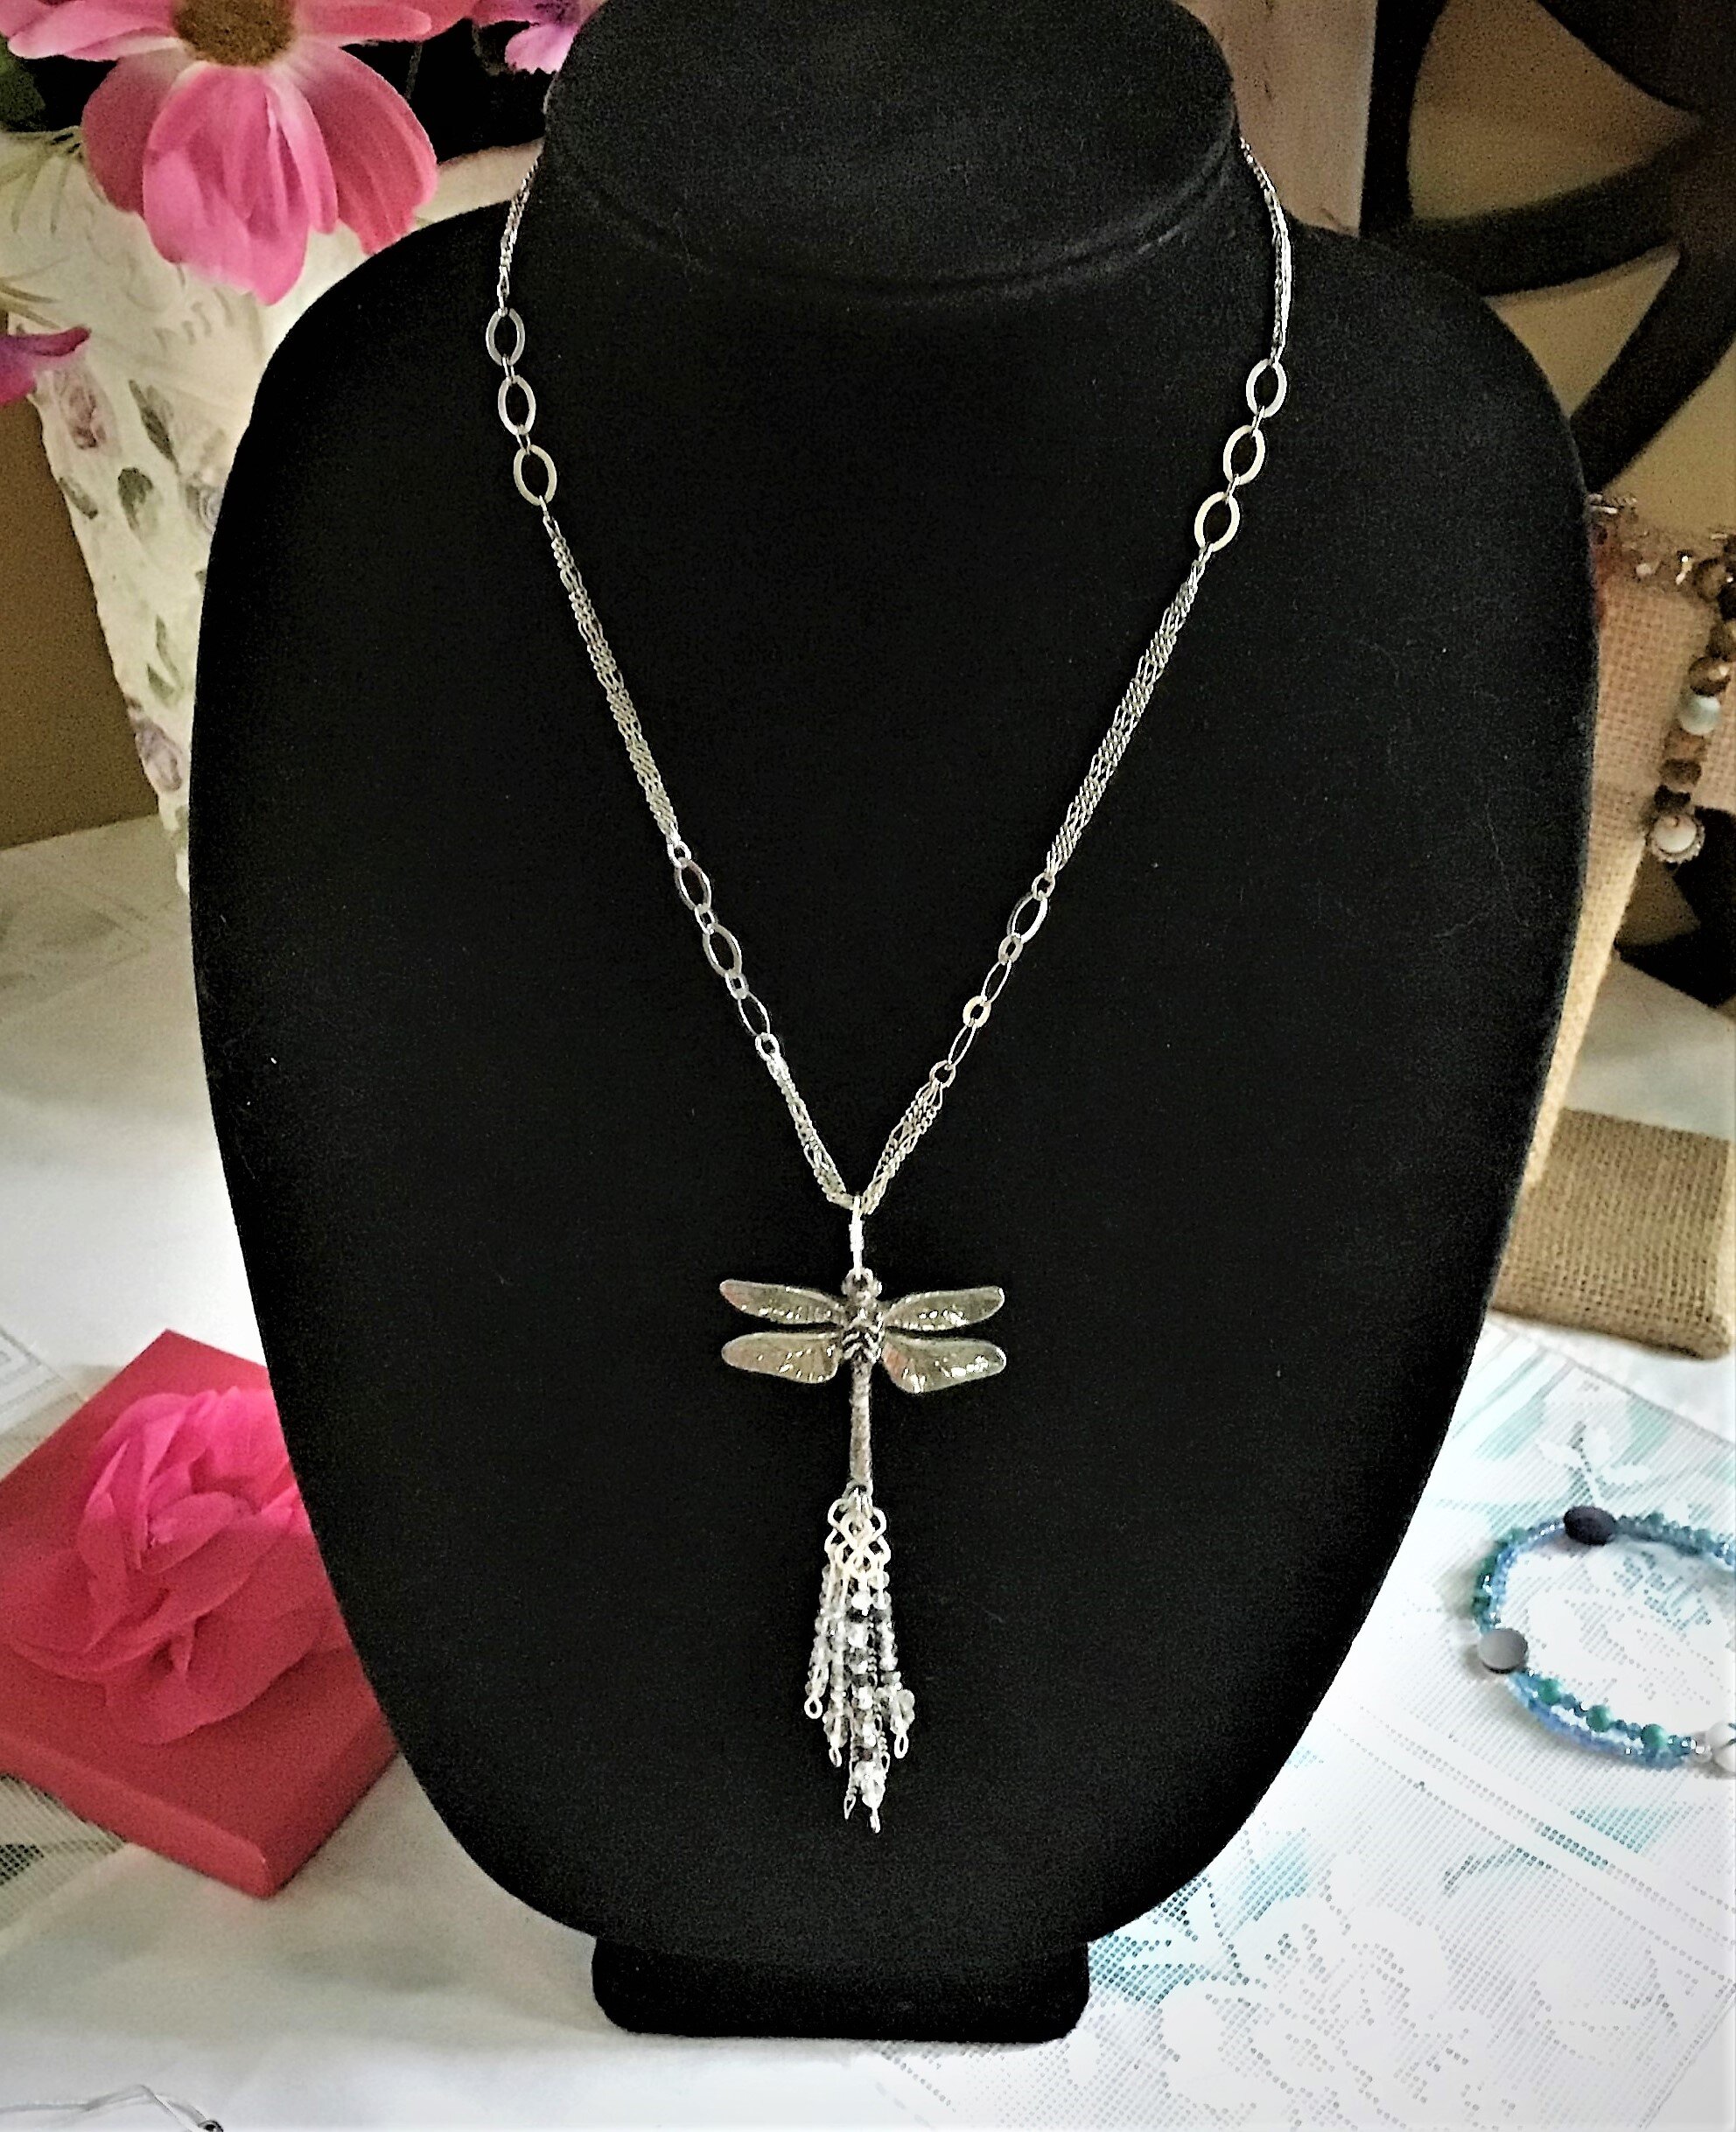 dragonfly necklace.jpg